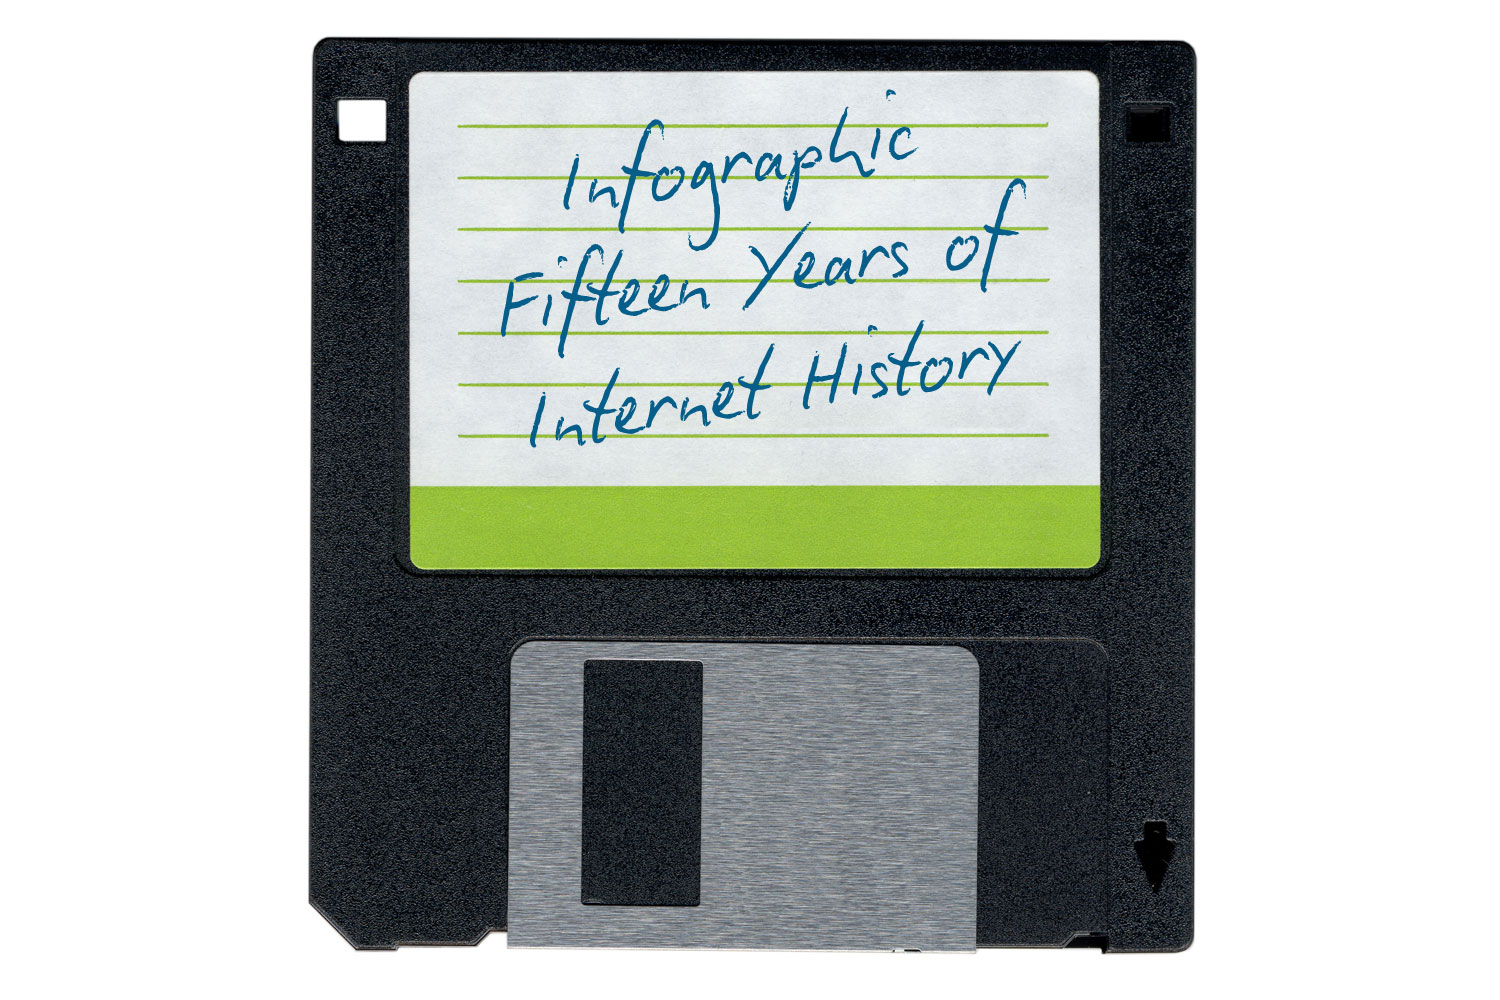 Infographic: 15 Years of Internet History